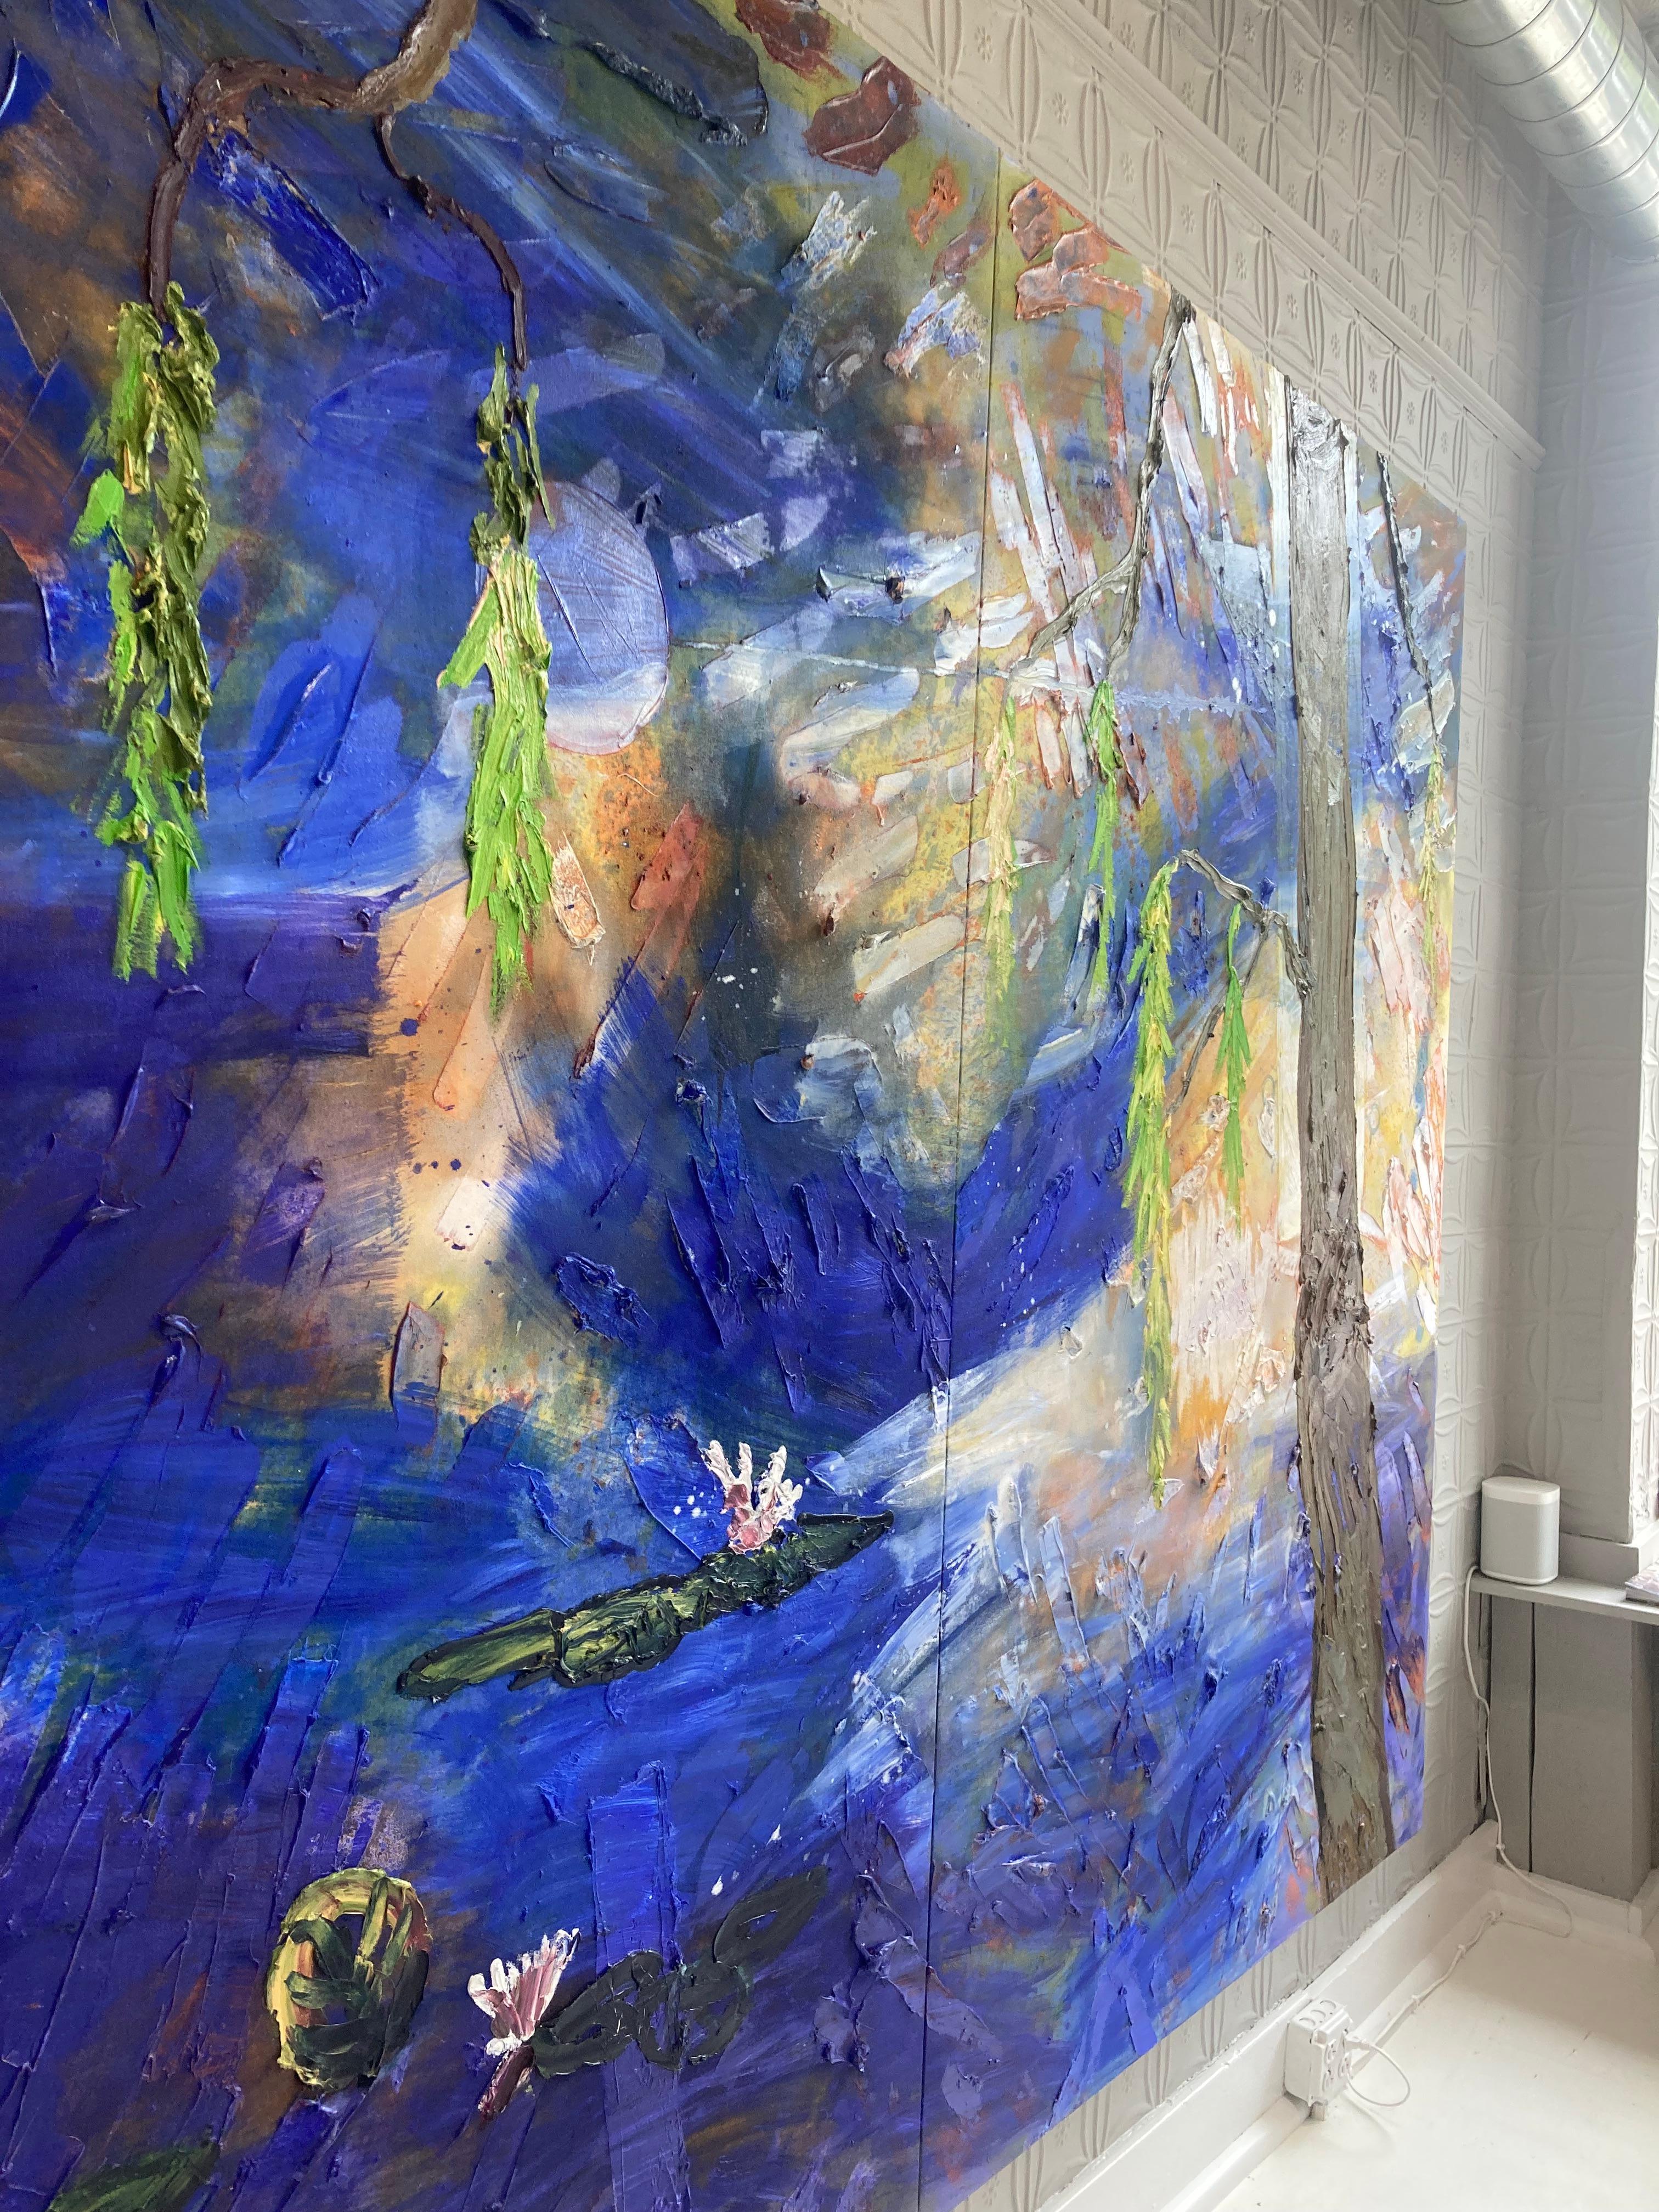 Cobalt Lilies - Abstract Expressionist Painting by Darius Yektai